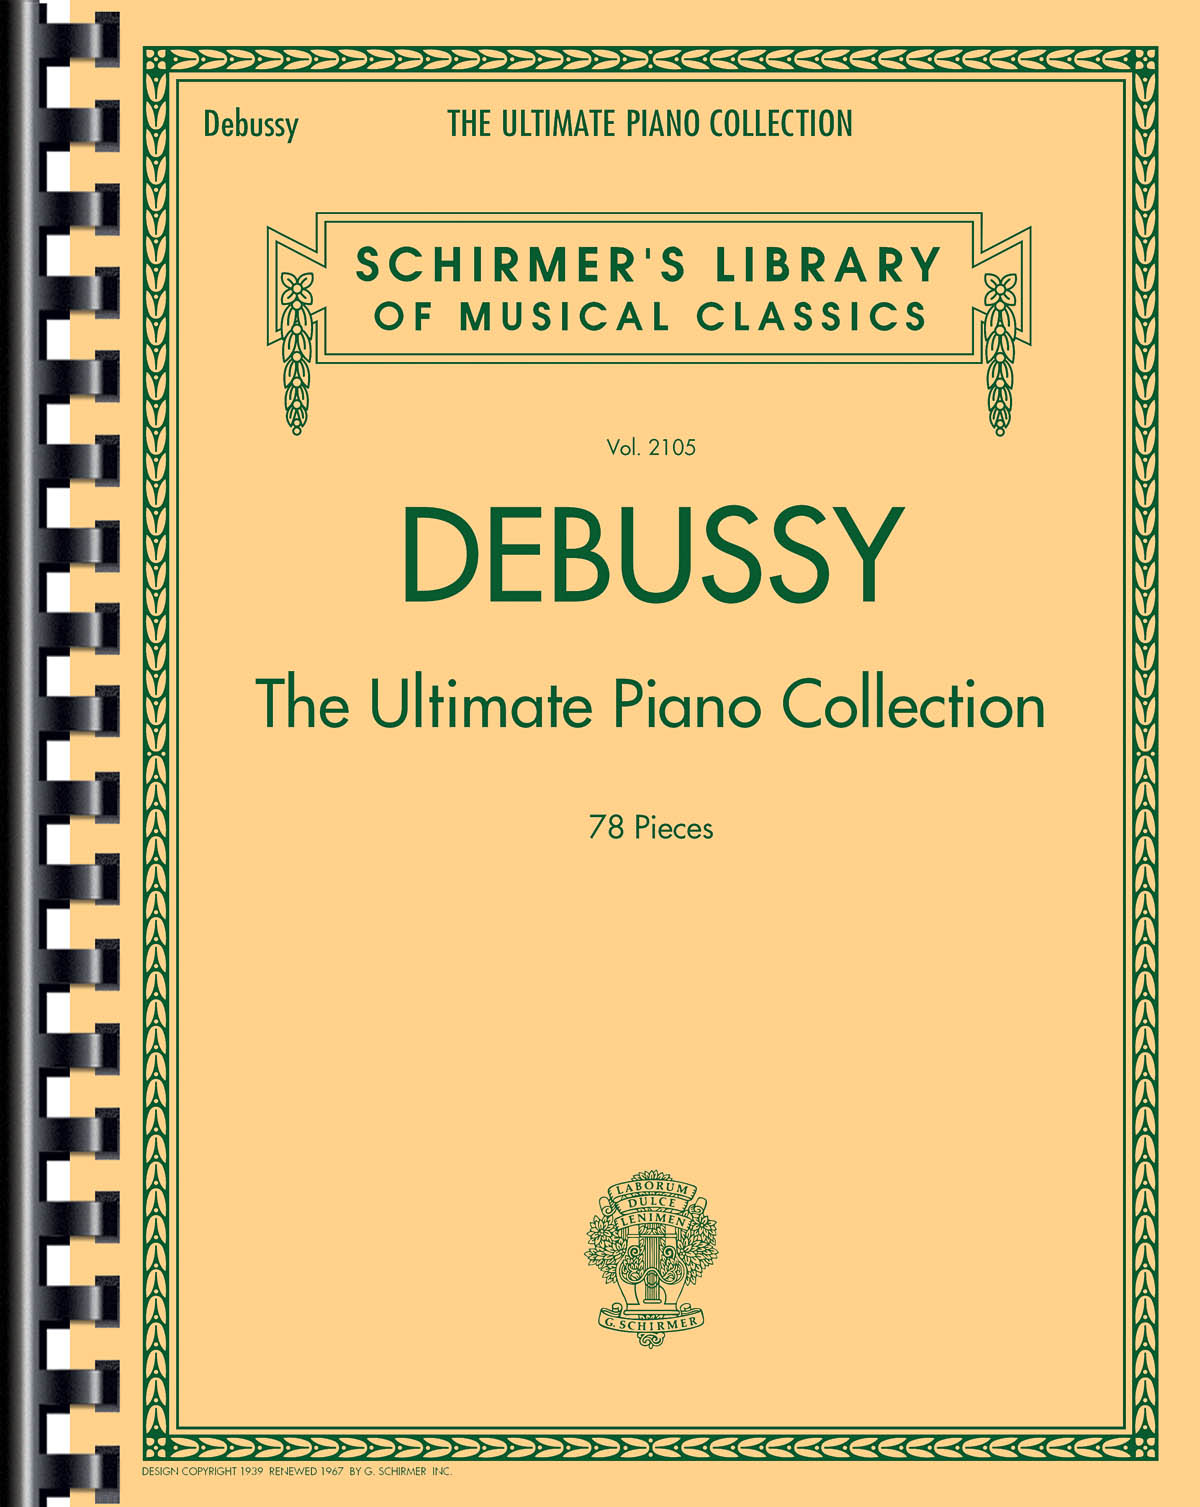 Debussy: The Ultimate Piano Collection